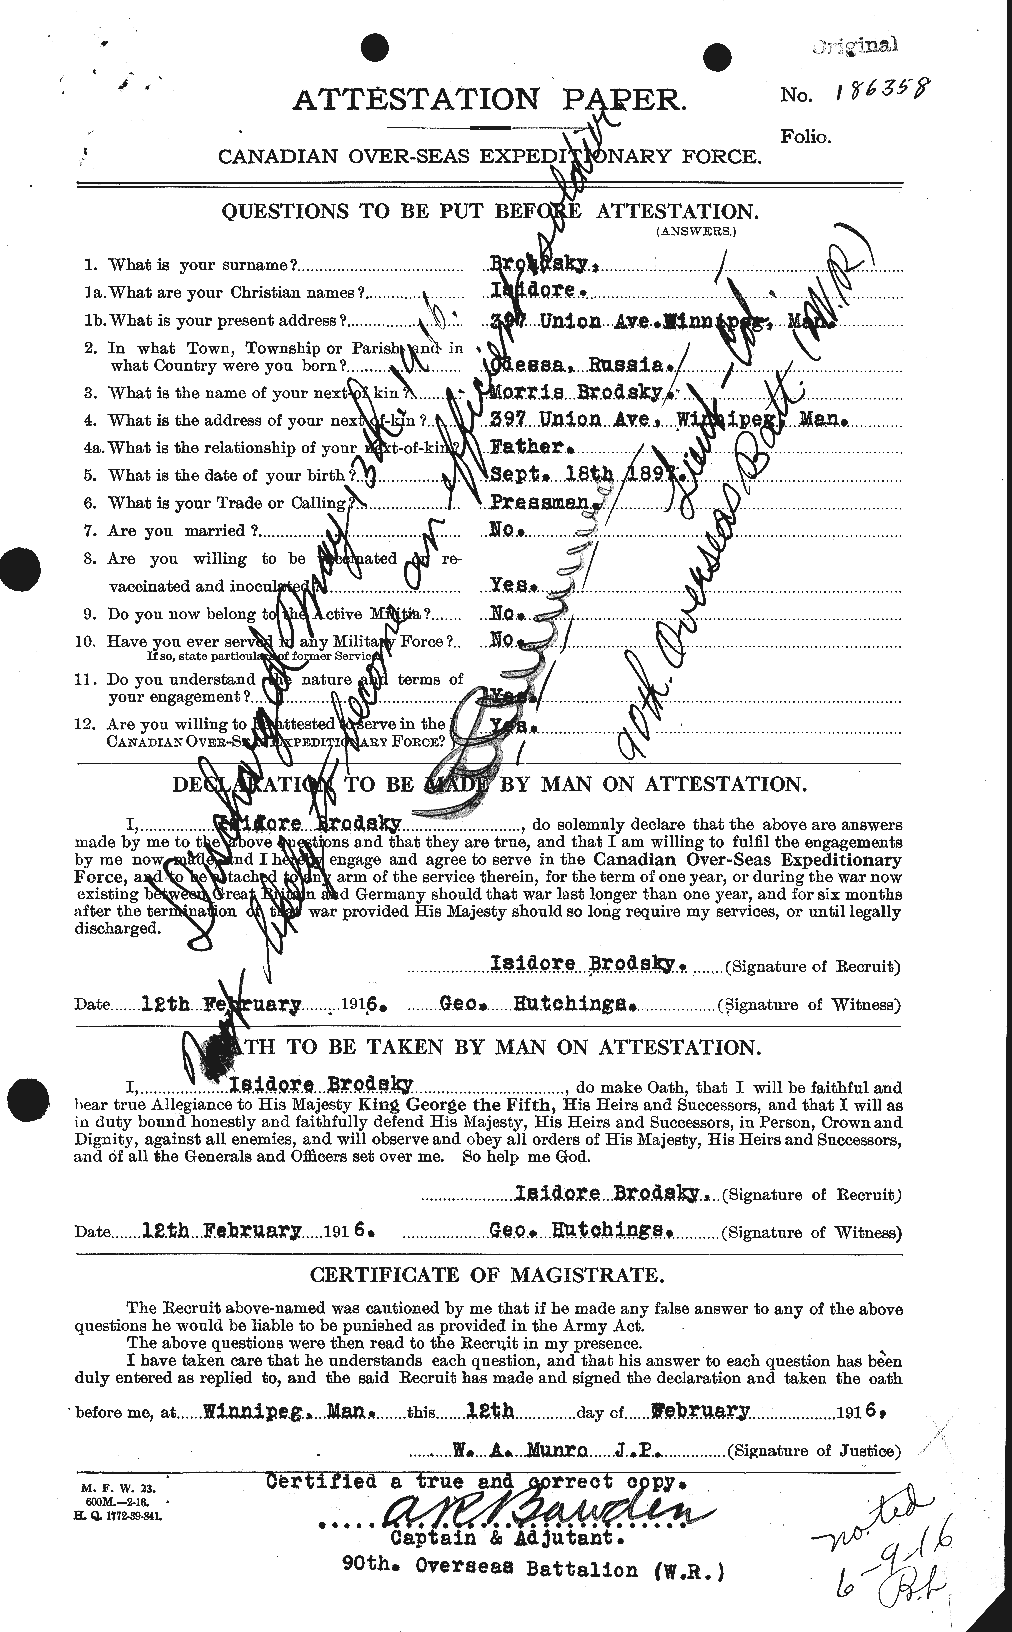 Personnel Records of the First World War - CEF 262037a